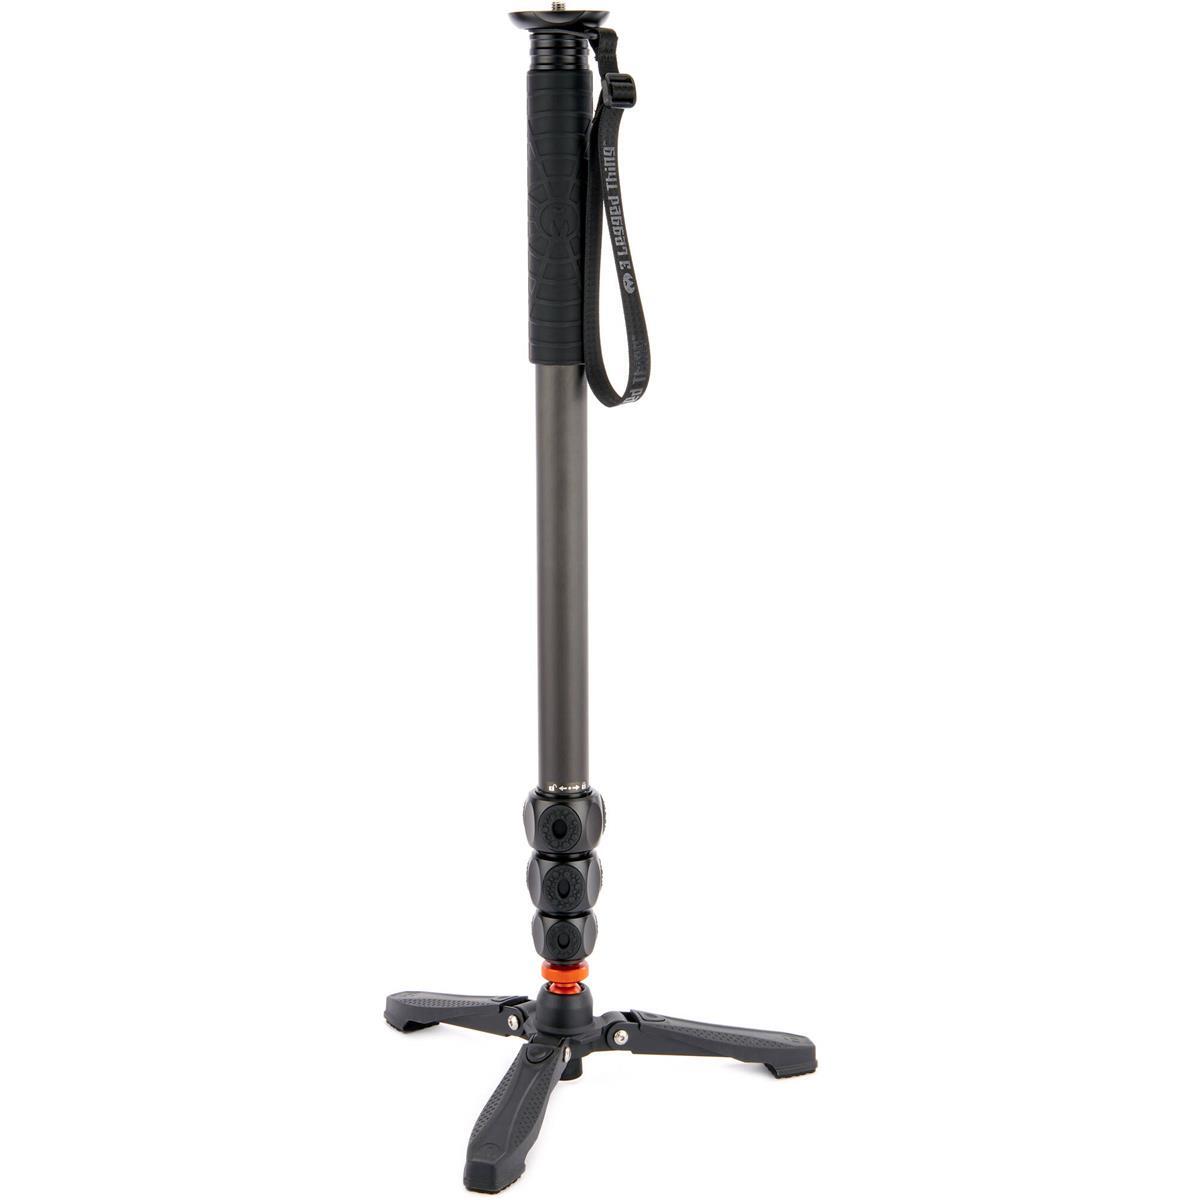 3 Legged Thing 3 Legged Thing Legends Lance Carbon Fibre Monopod with Docz foot stabiliser, darkness